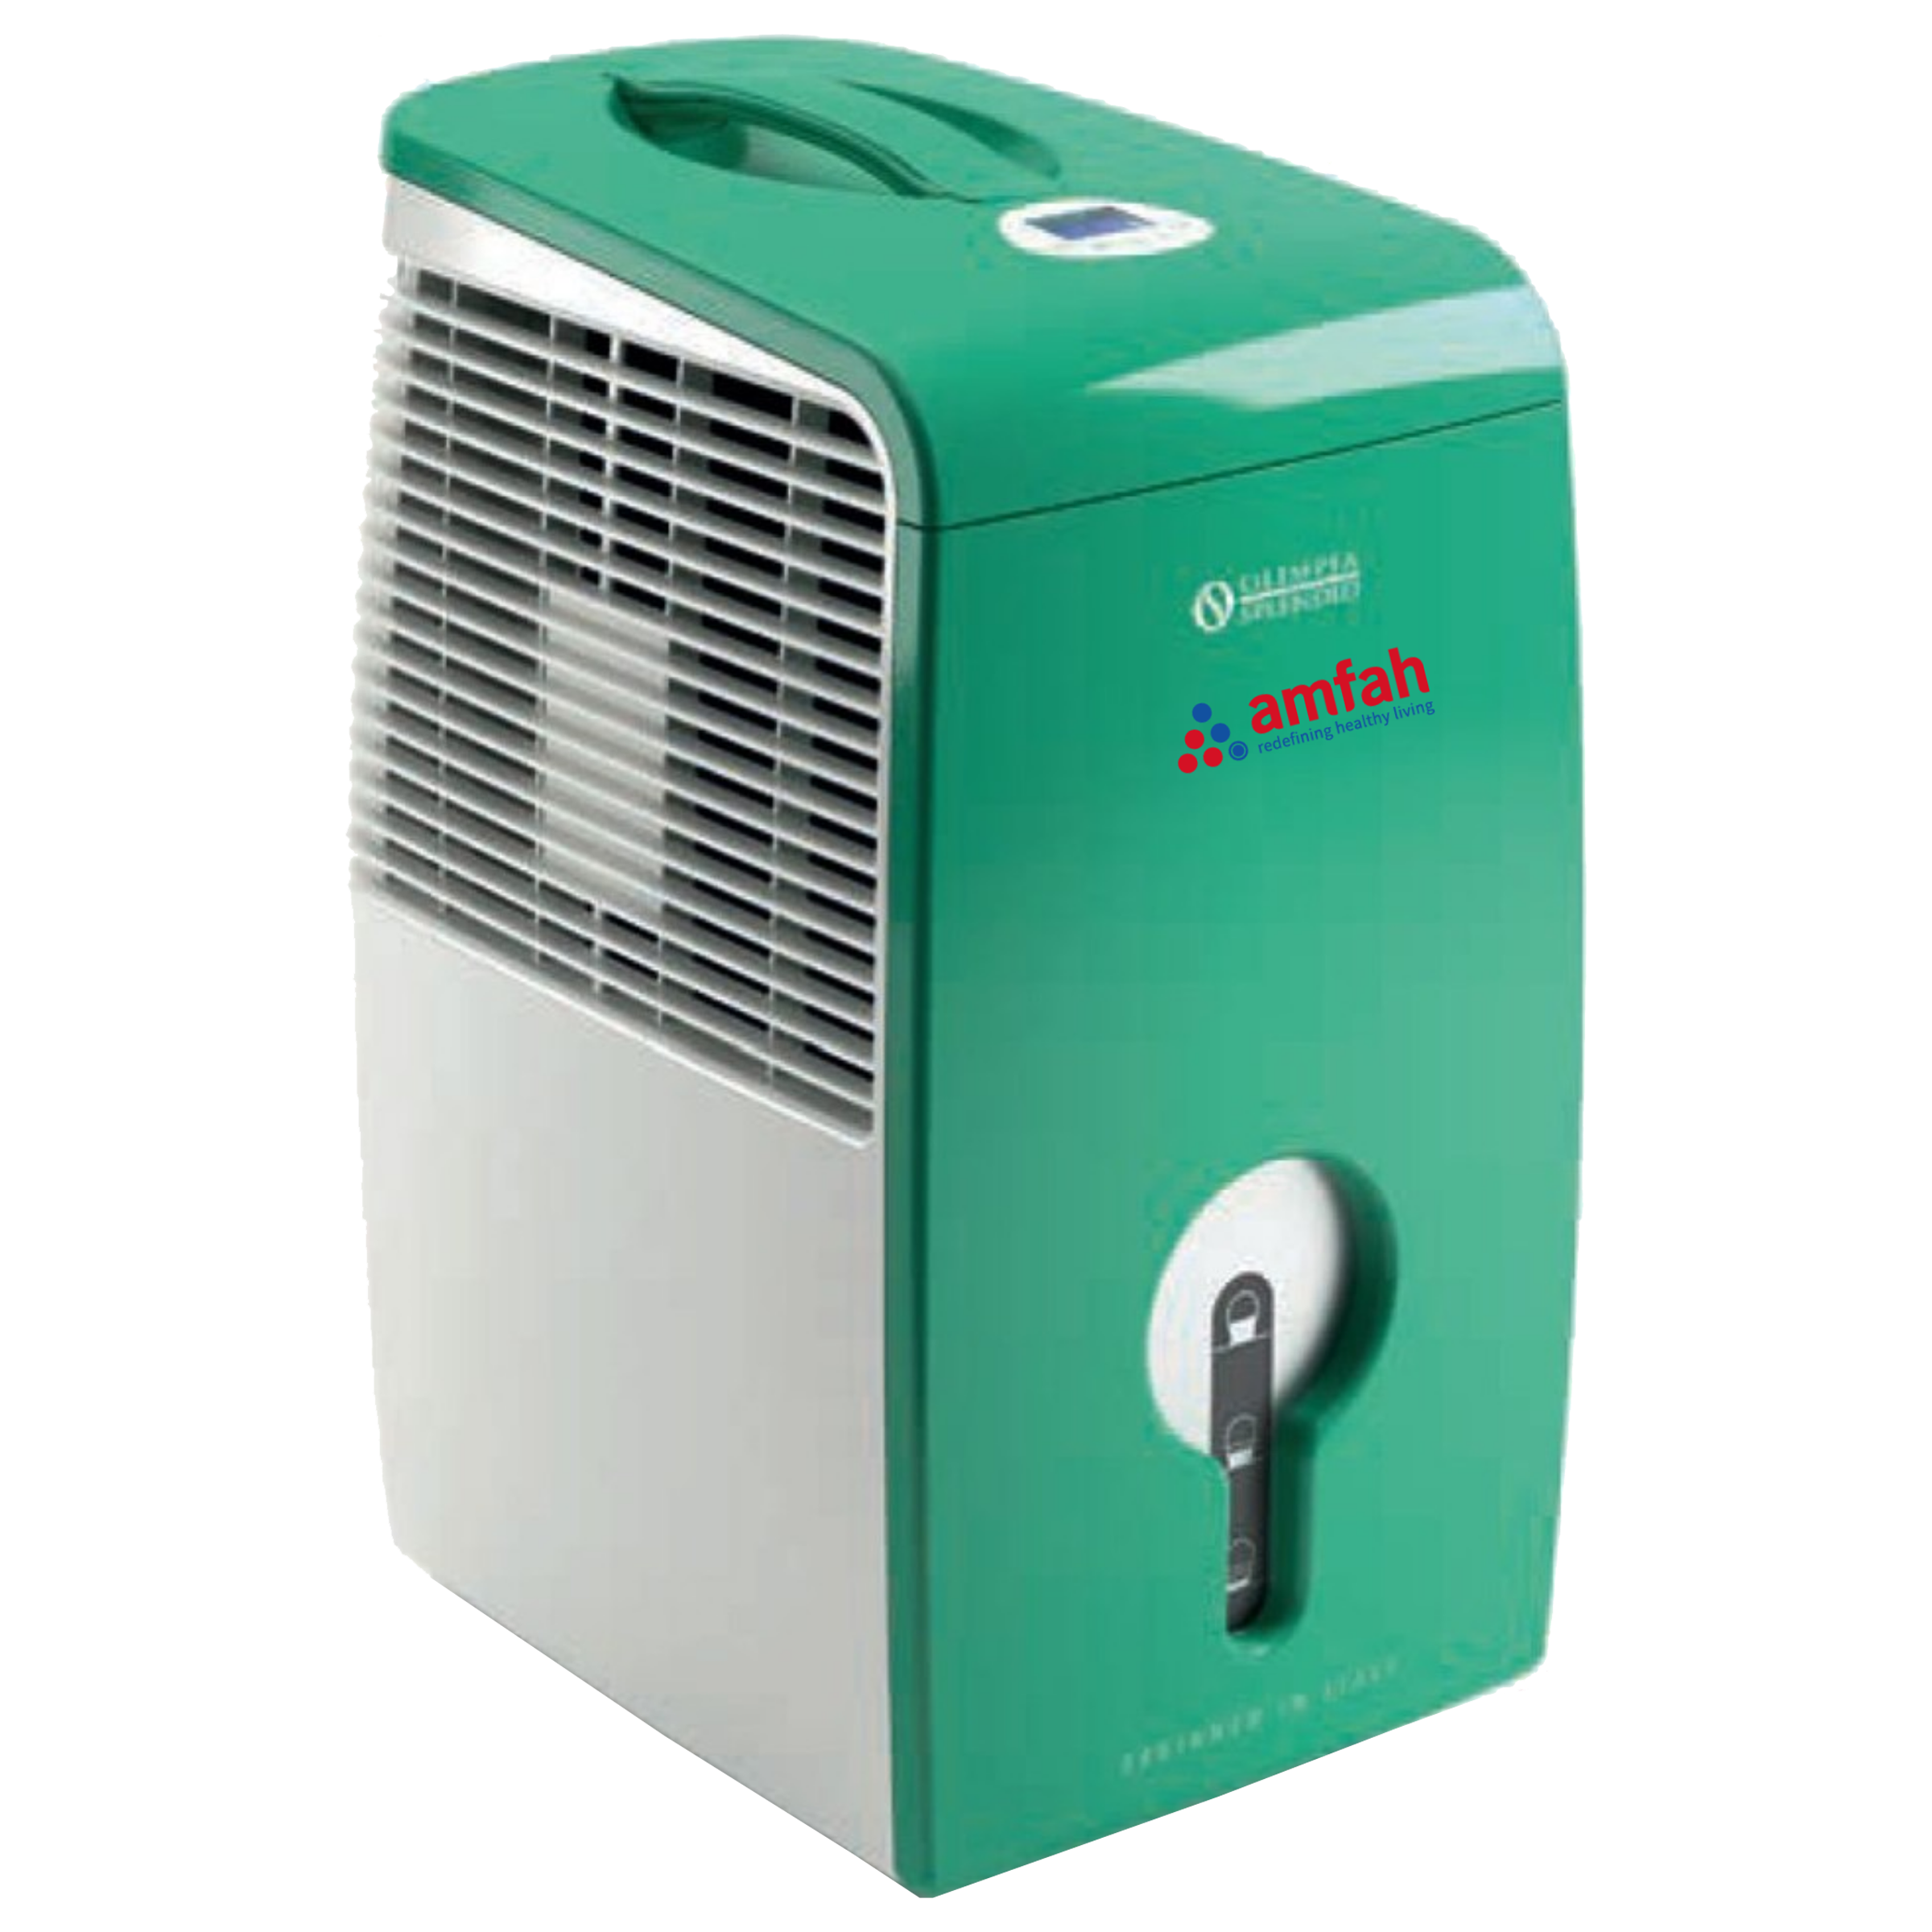 Amfah Filtration Dehumidifier (4 Stage Filter, AQUARIA THERMO 22, Green)_1